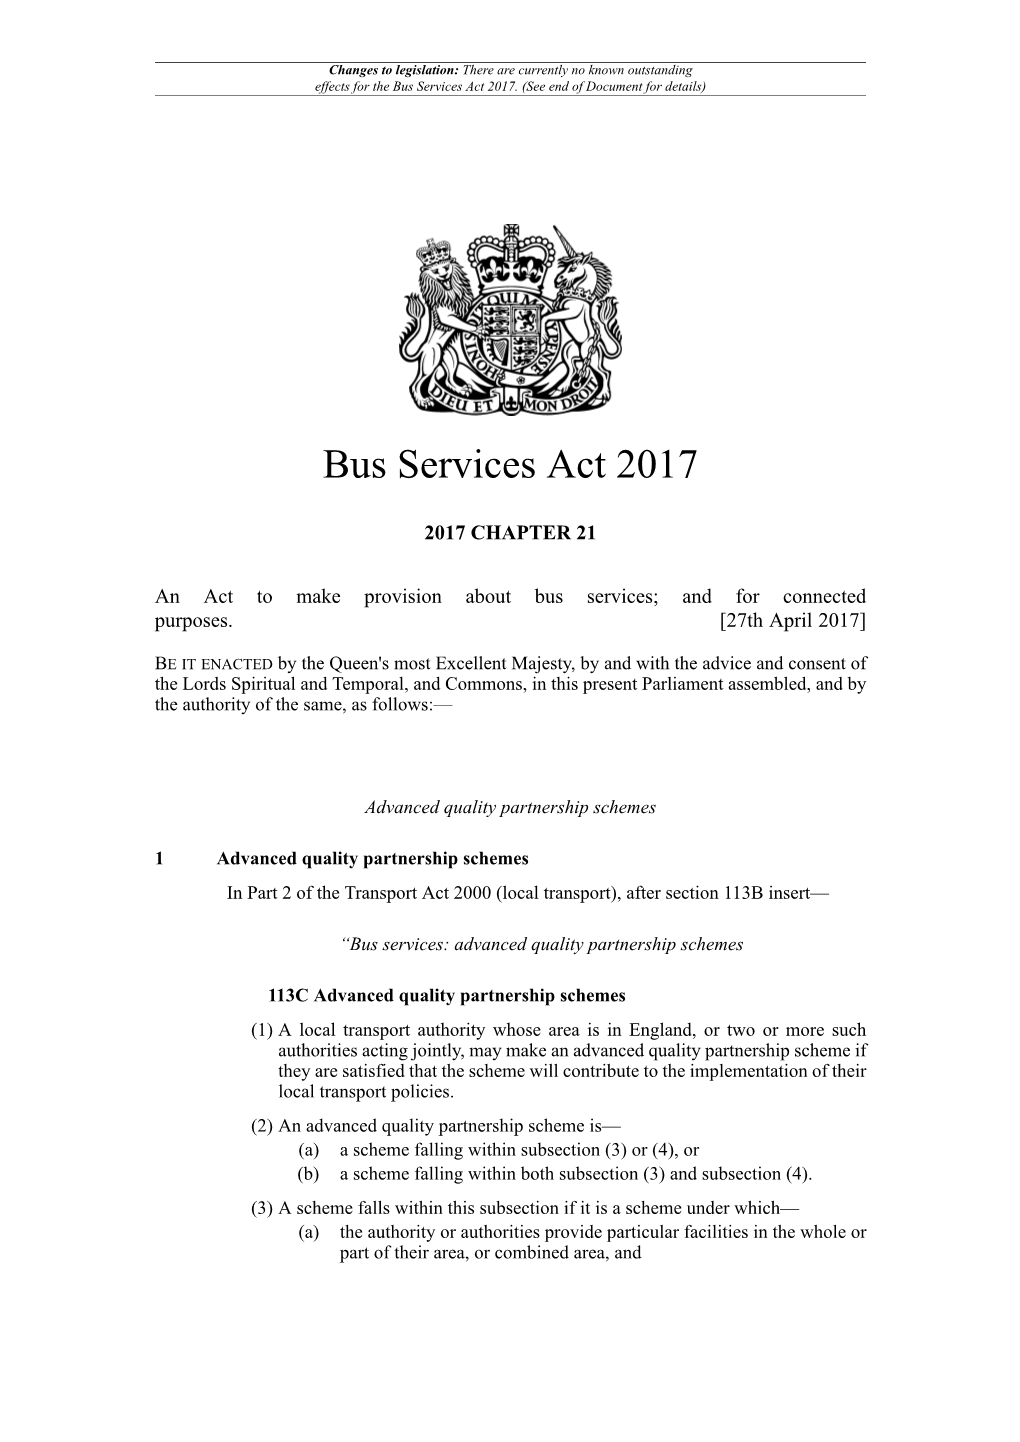 Bus Services Act 2017